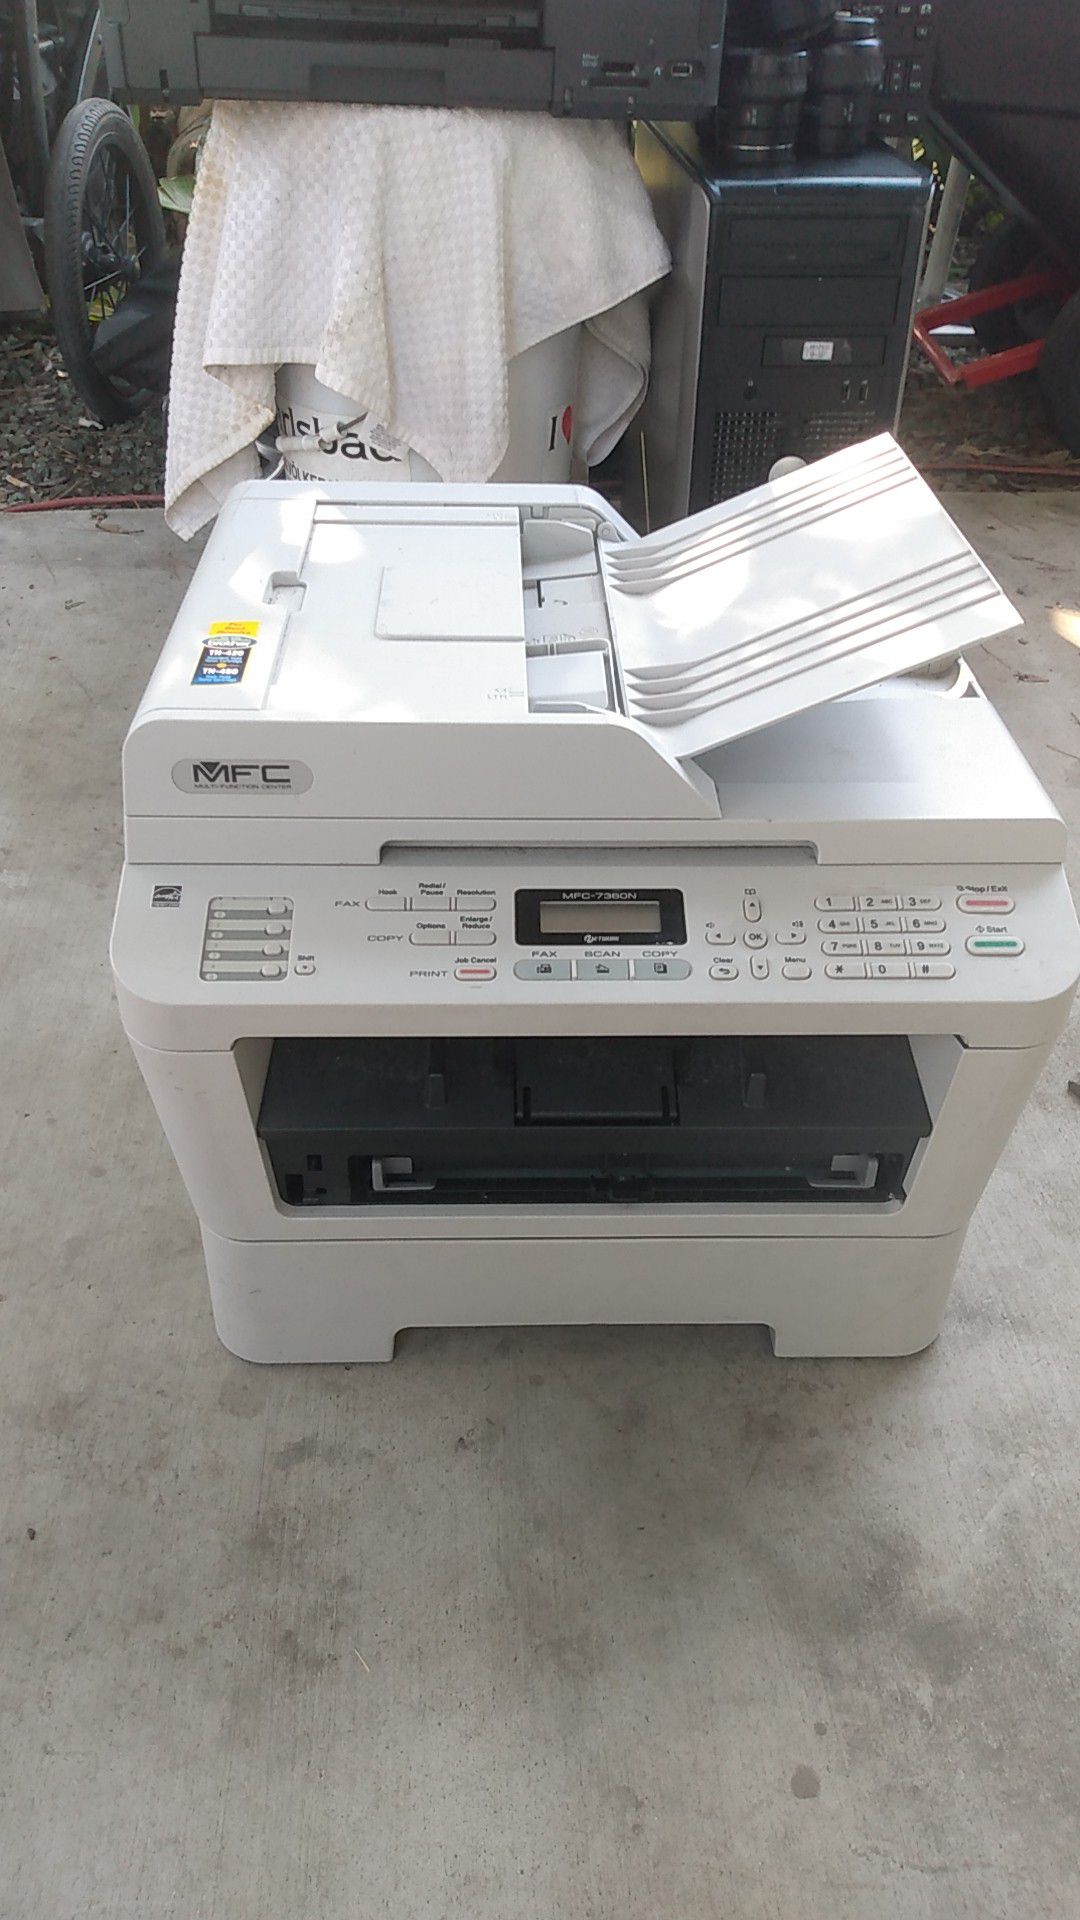 Brother MFC printer brother mfc-7360n